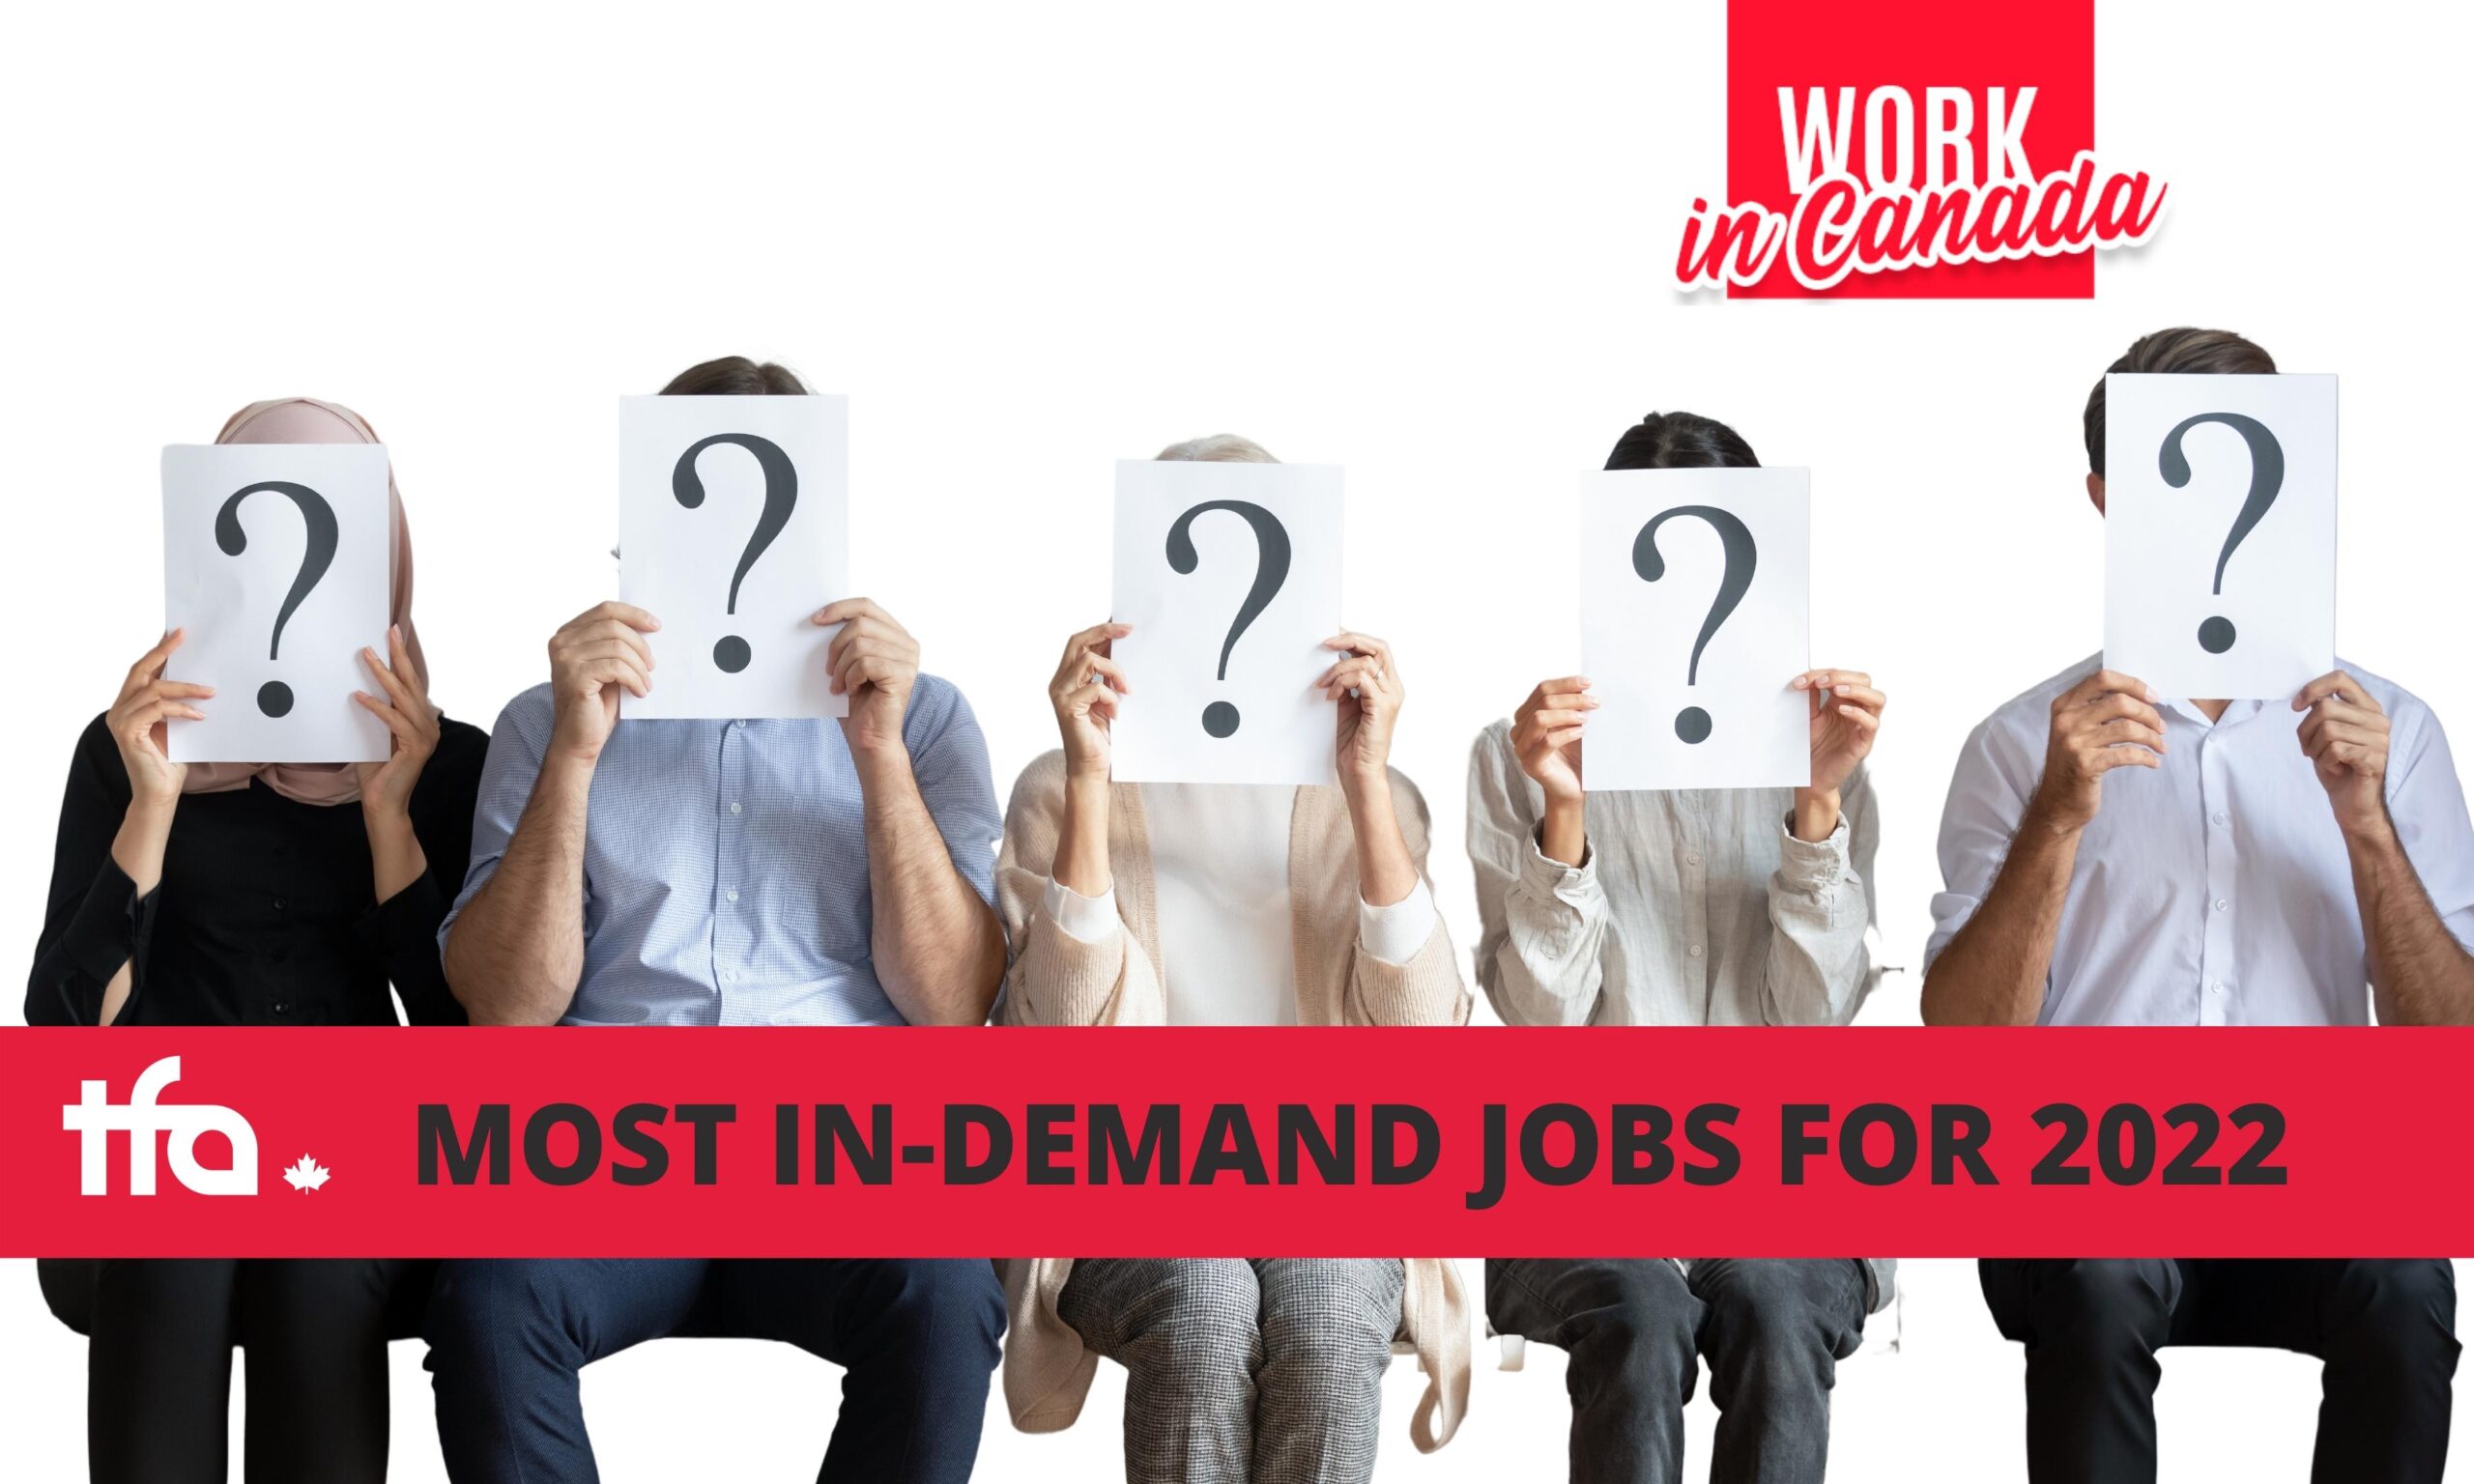 list-of-the-most-in-demand-jobs-in-canada-for-2022-its-salary-wage-and